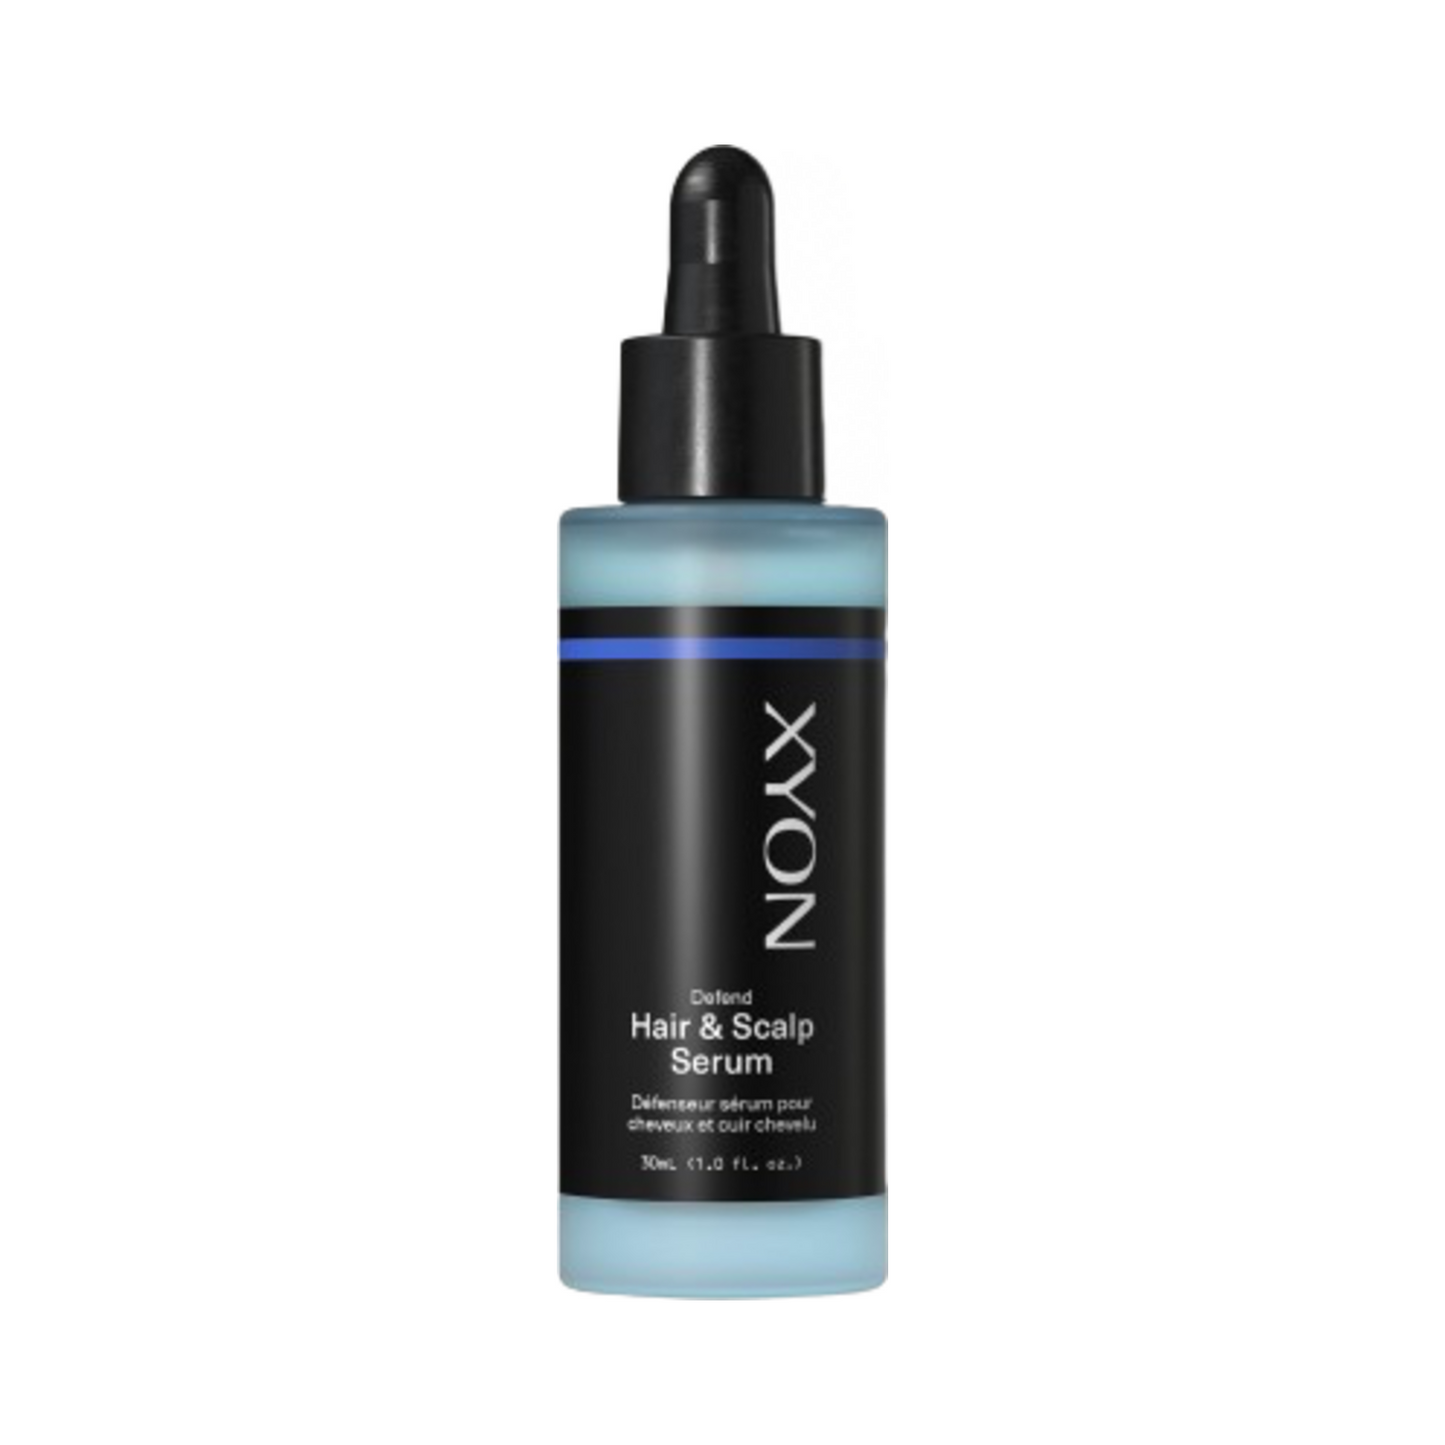 XYON Defend Hair and Scalp Serum